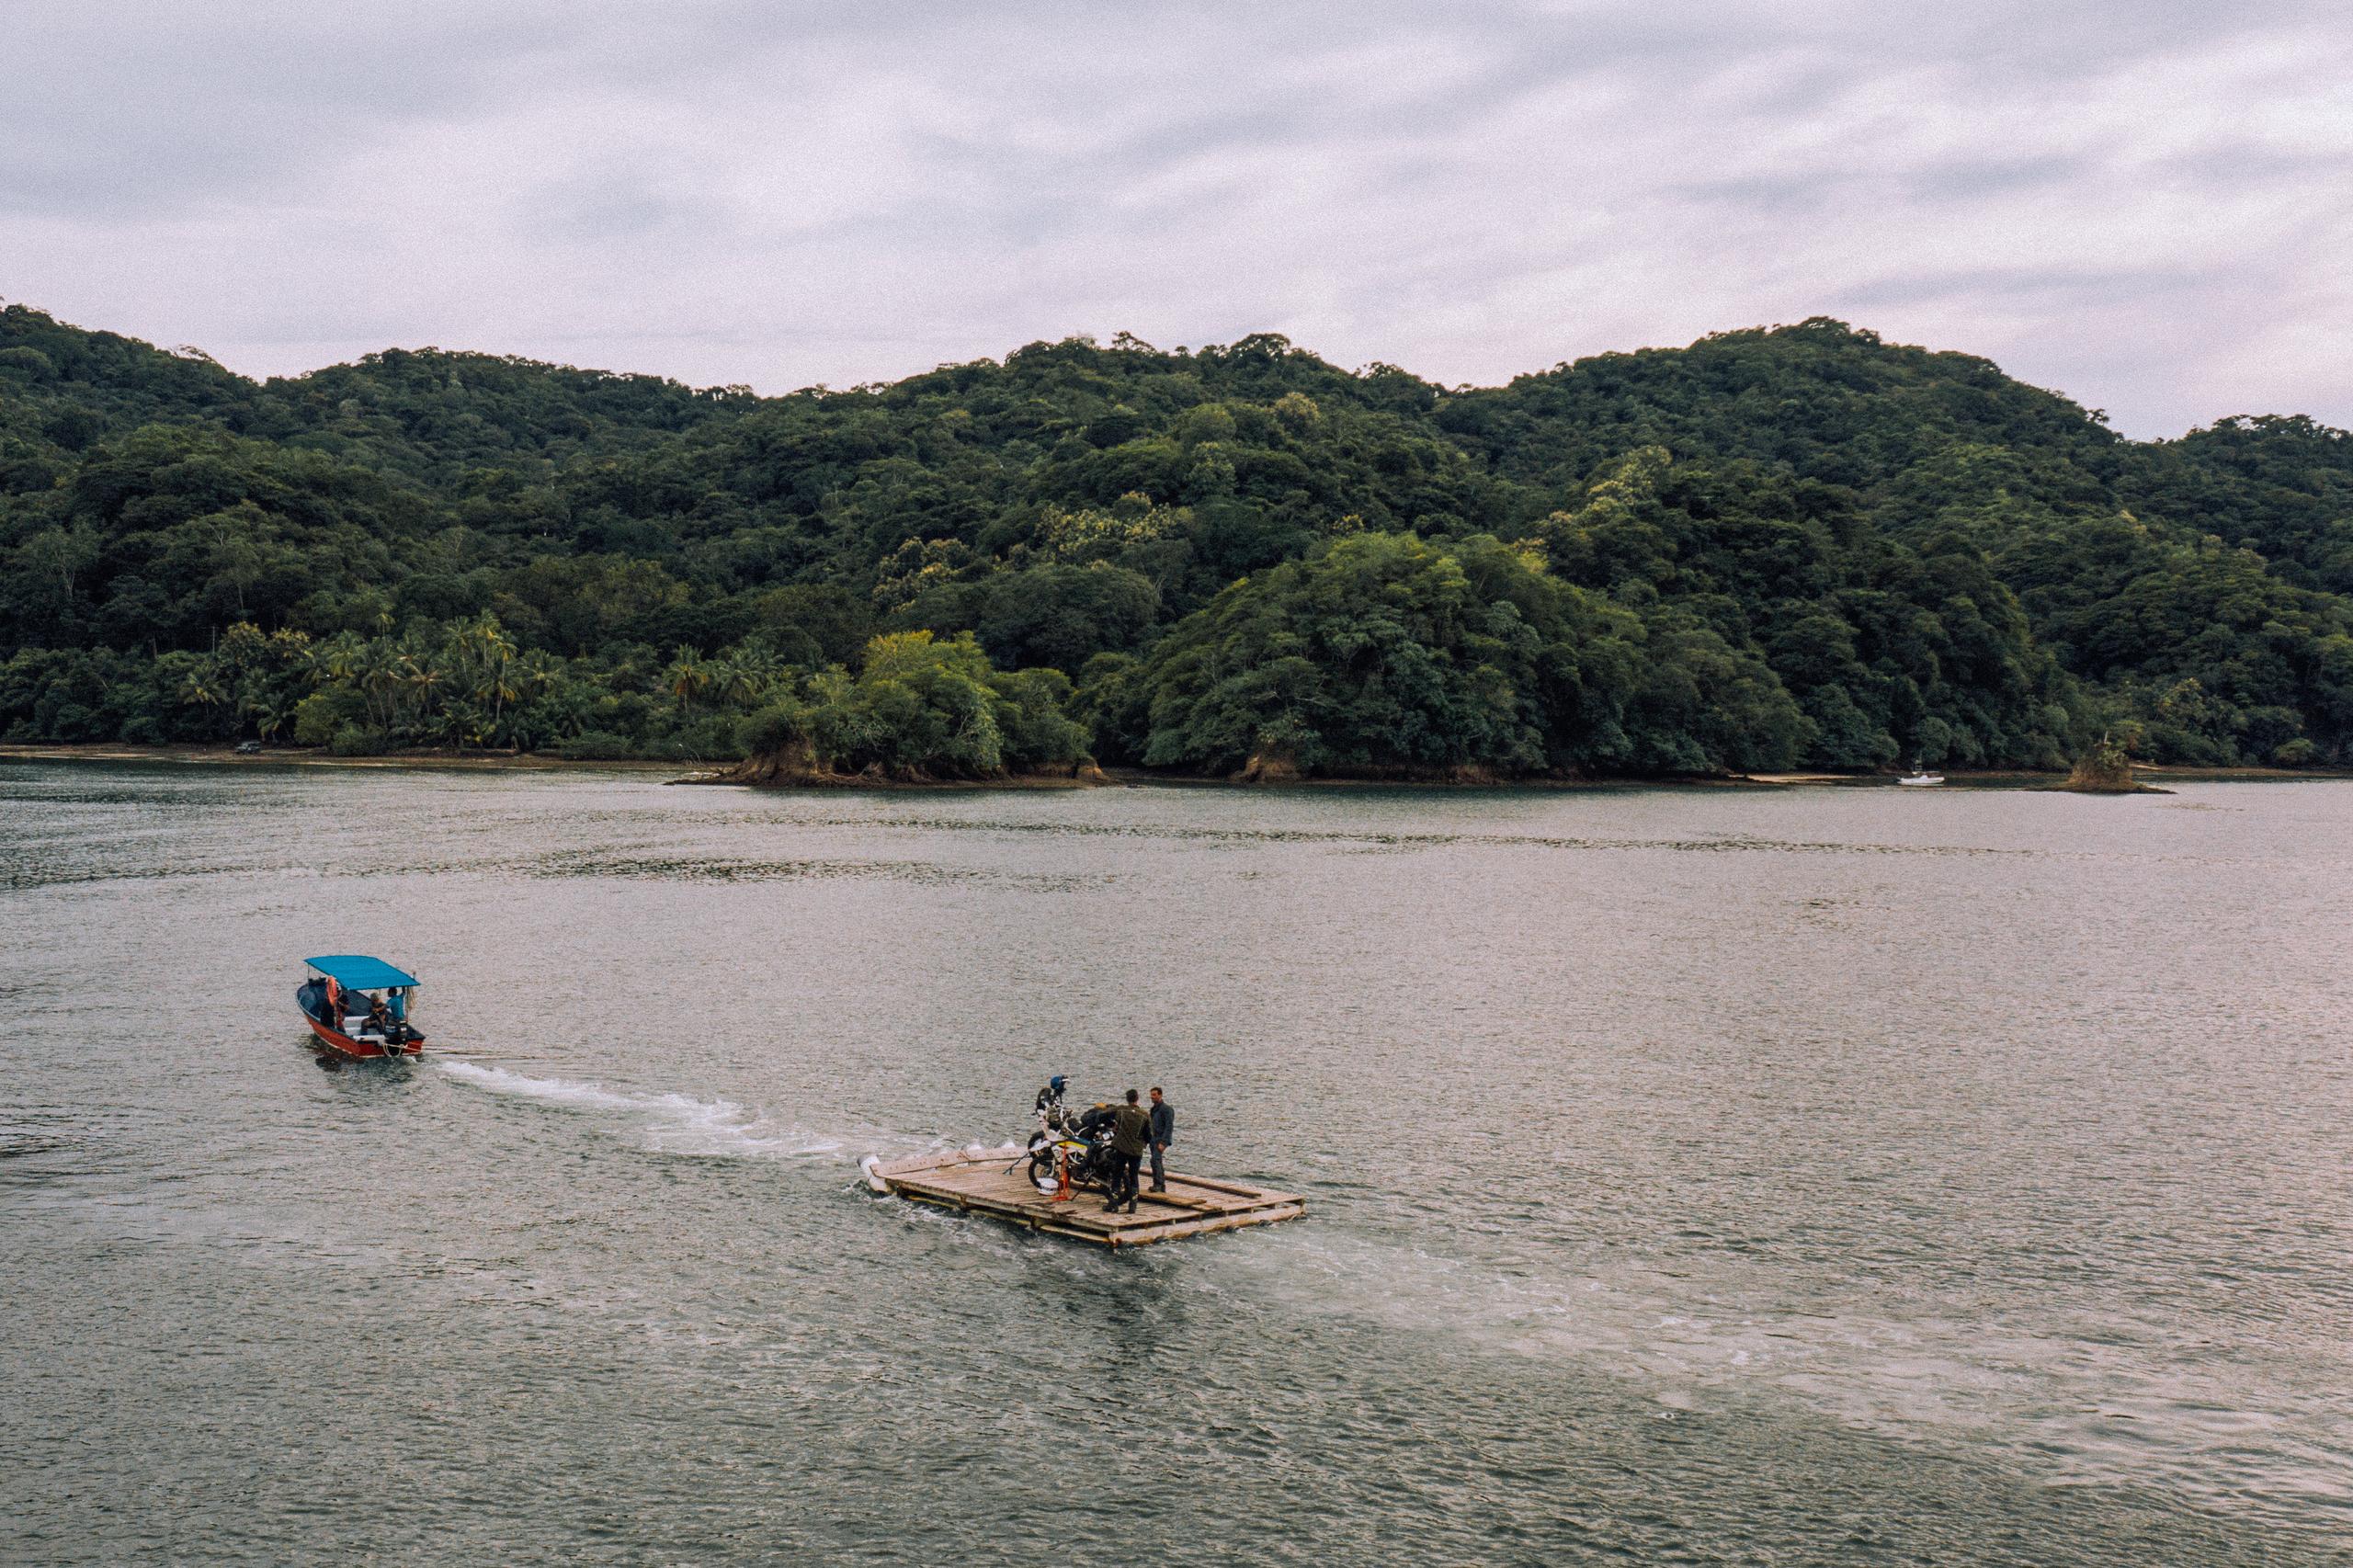 Two men with motorcycles on a wood raft being towed by a boat in the Gulf of Nicoya, Costa Rica